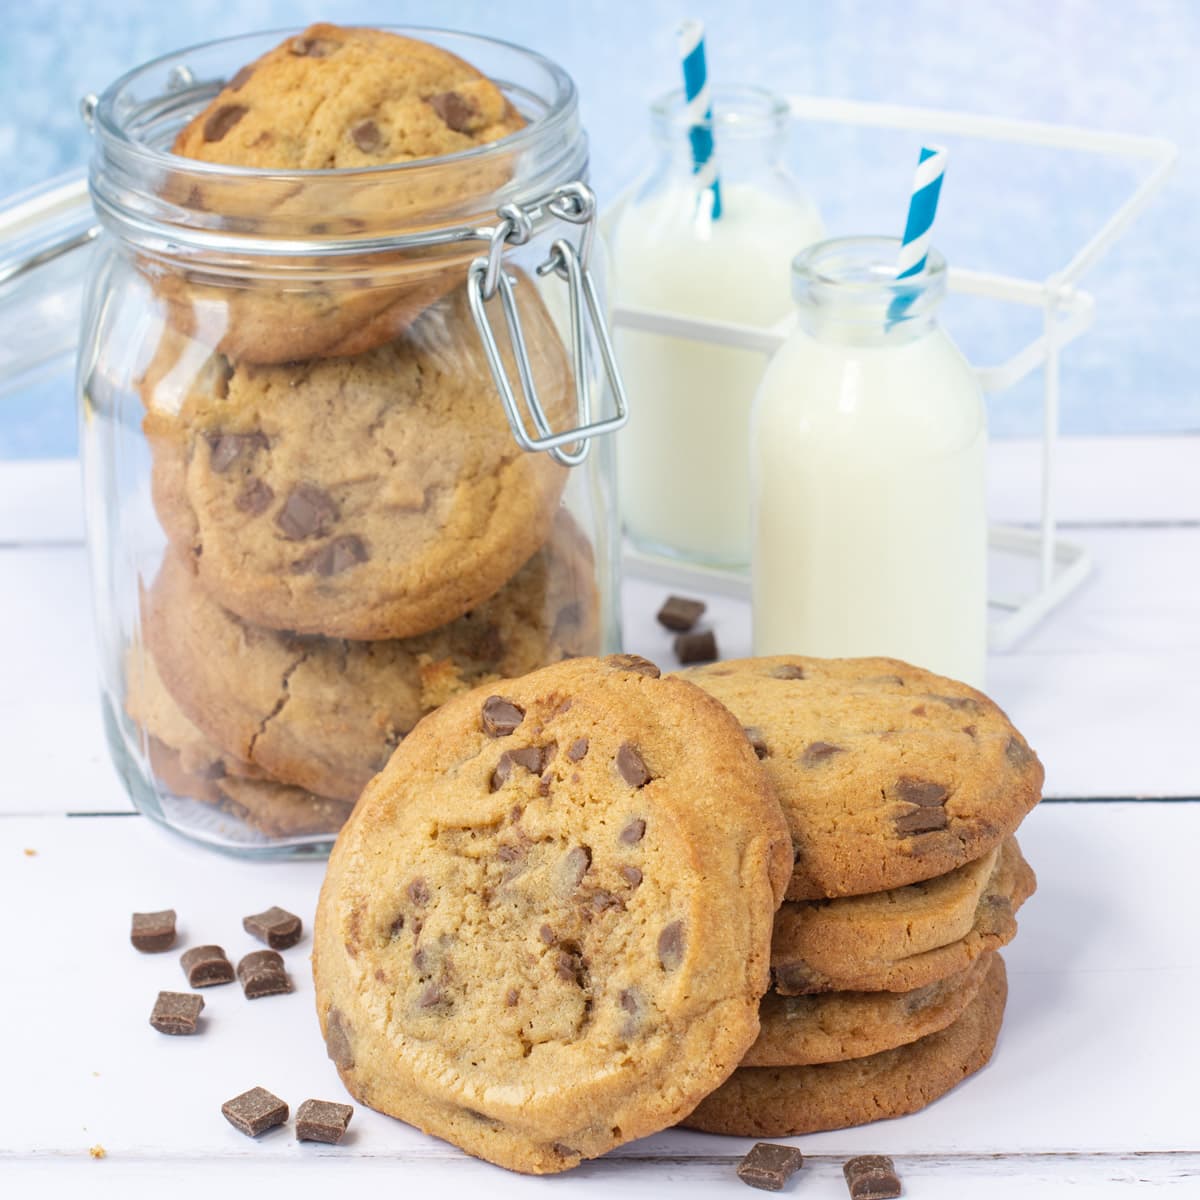 Delicious chunky chocolate chip cookies that the cookie monster would go crazy for. Soft in the middle, crunchy at the edges and packed full of milk chocolate chunks.